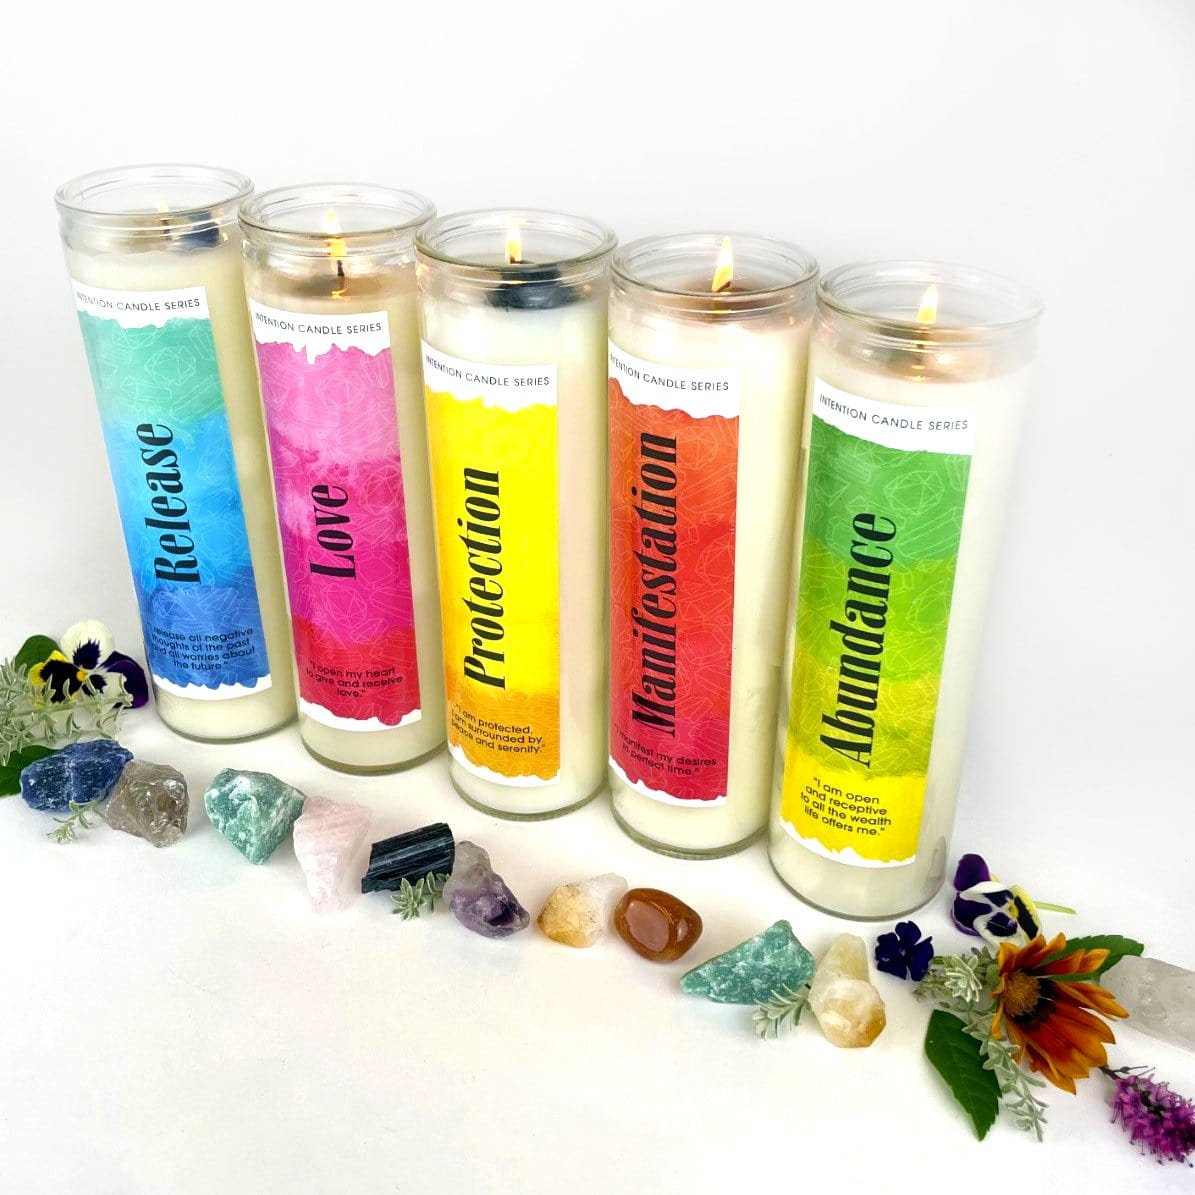 all of the available candles in this series that is available, Release, Love, Protection, Manifestation, Abundance